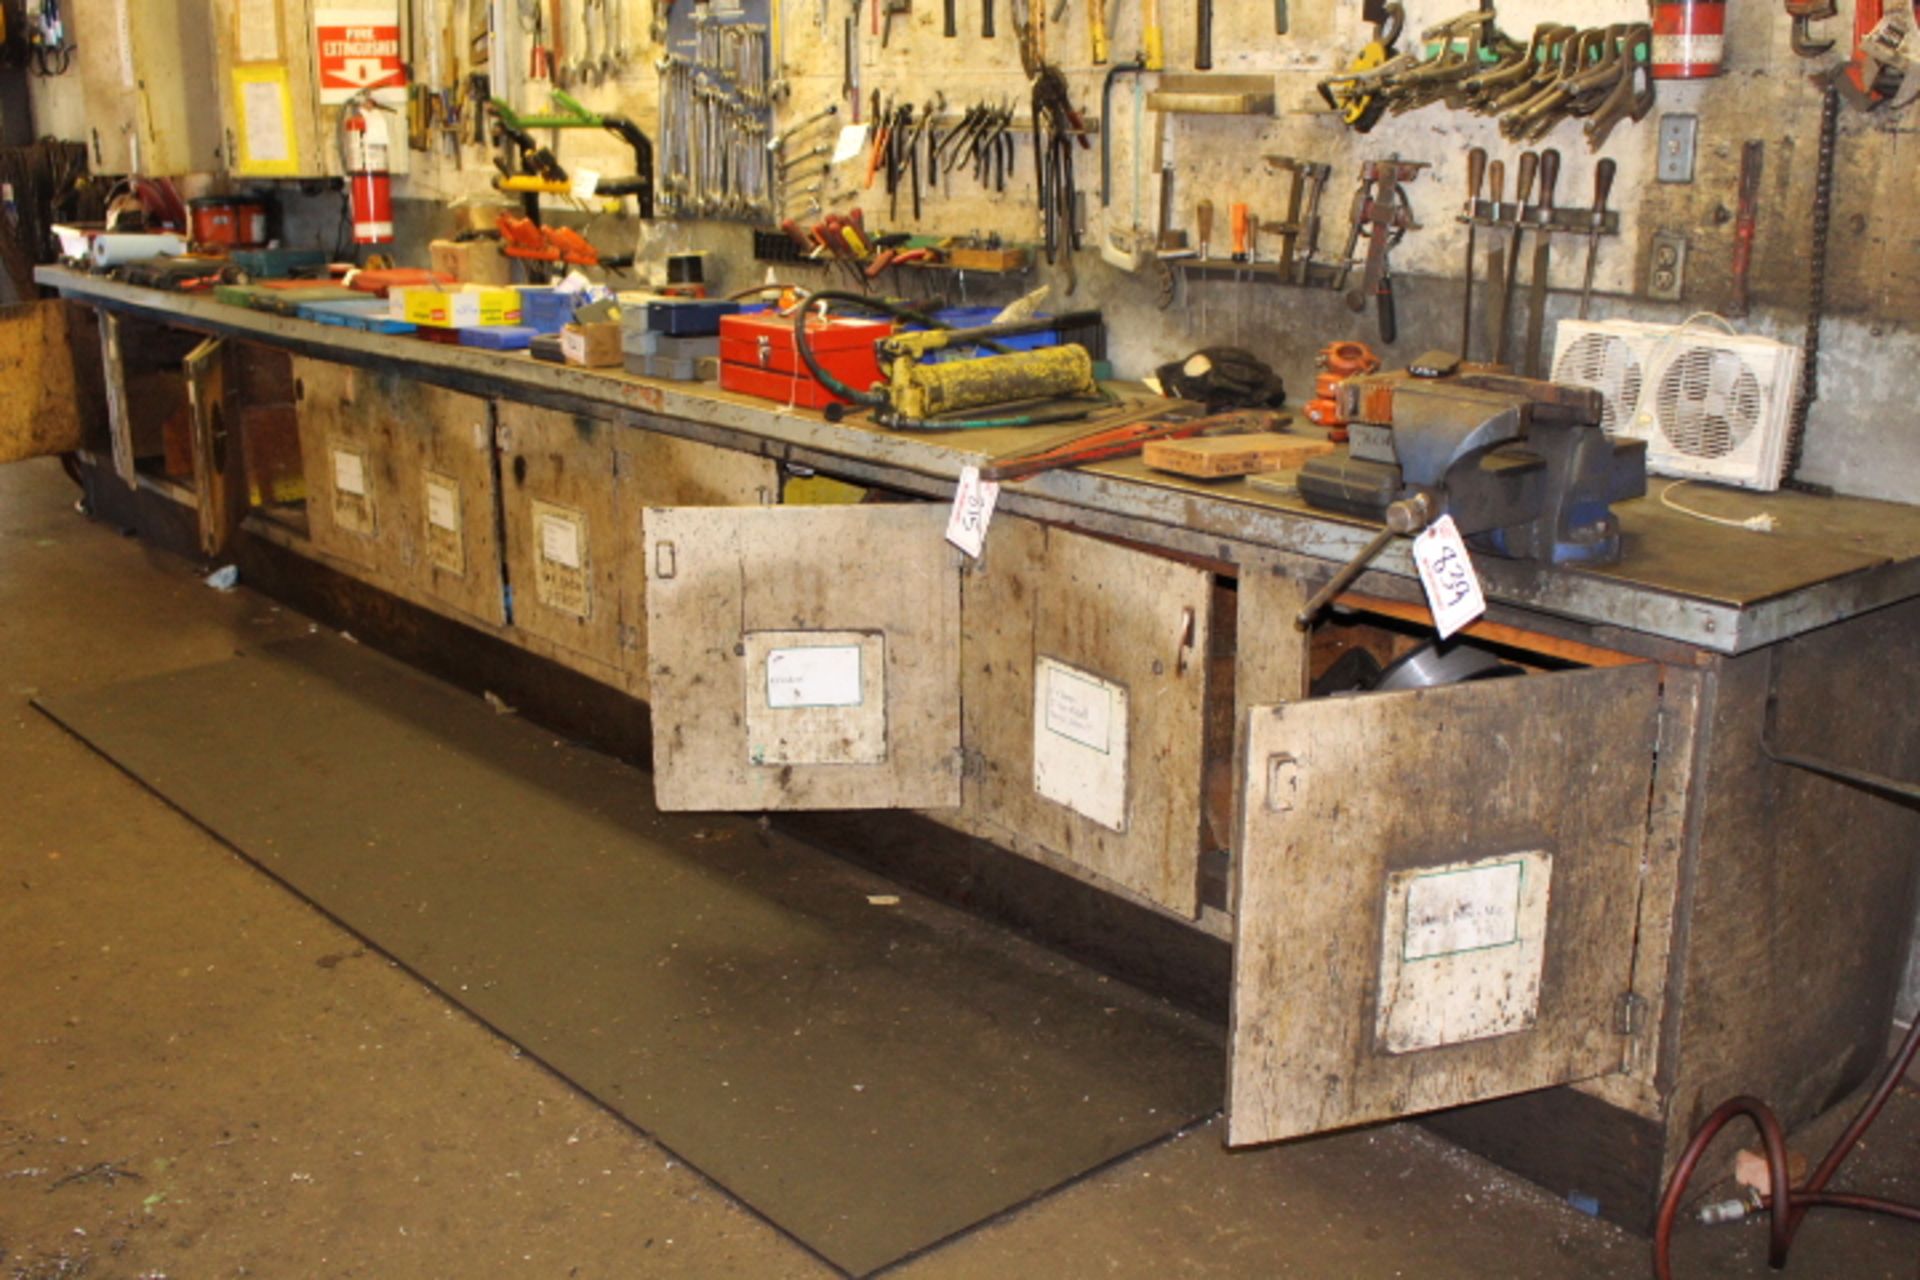 22' LONG METAL TOPPED WORK BENCH W/ CABINETS BELOW & ABOVE, INCL. 8" BENCH VISE